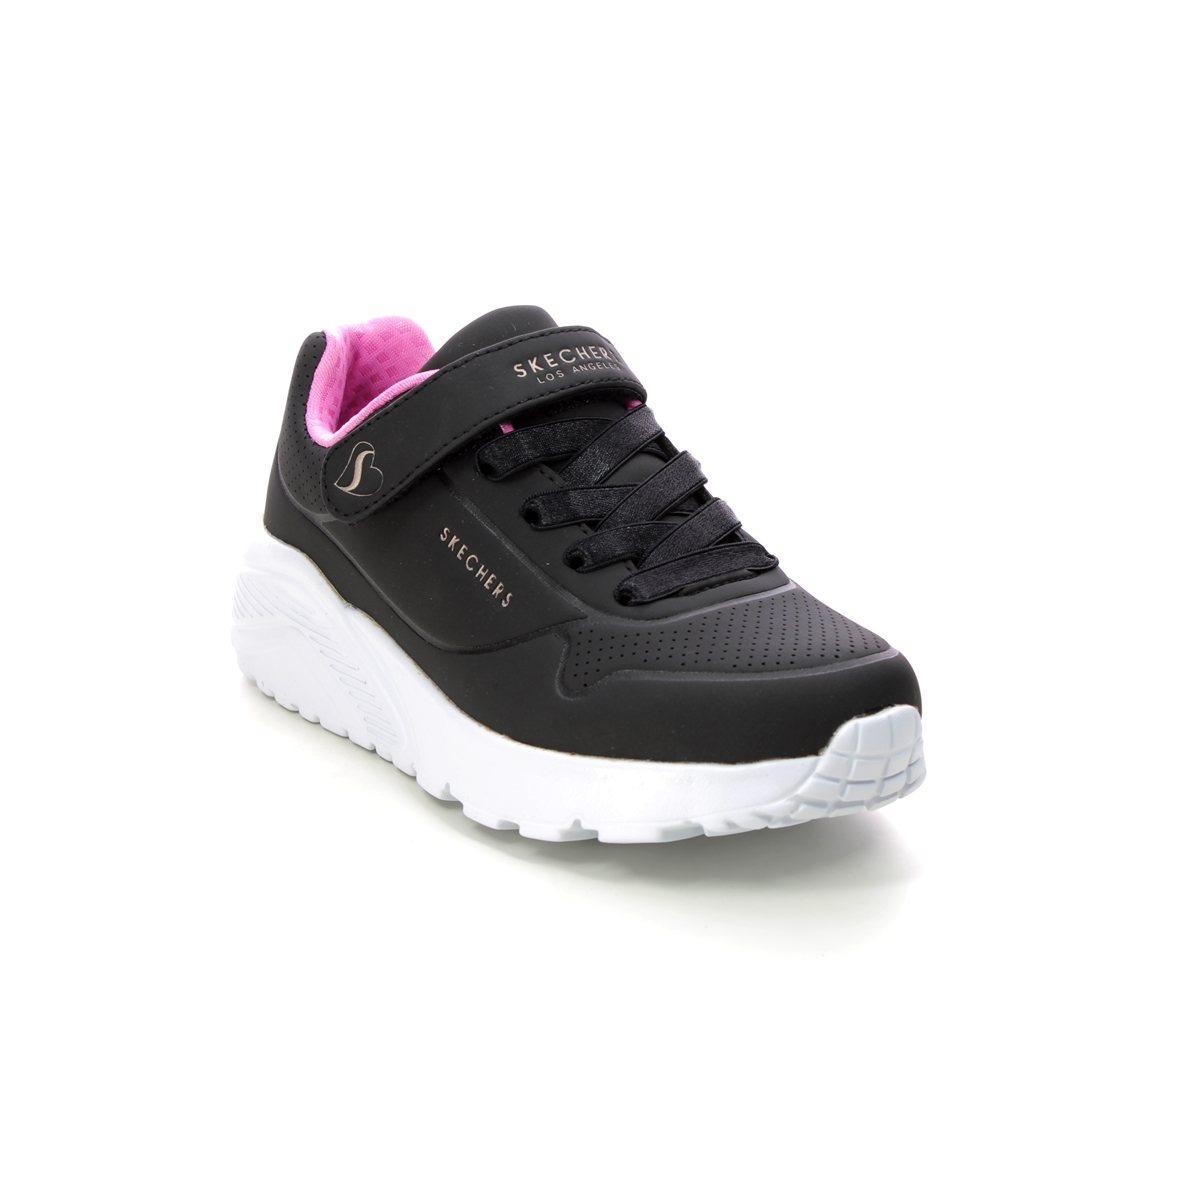 Skechers Uno Lite Bungee BKRG Black Rose Gold Kids girls trainers 310451L in a Plain Man-made in Size 34